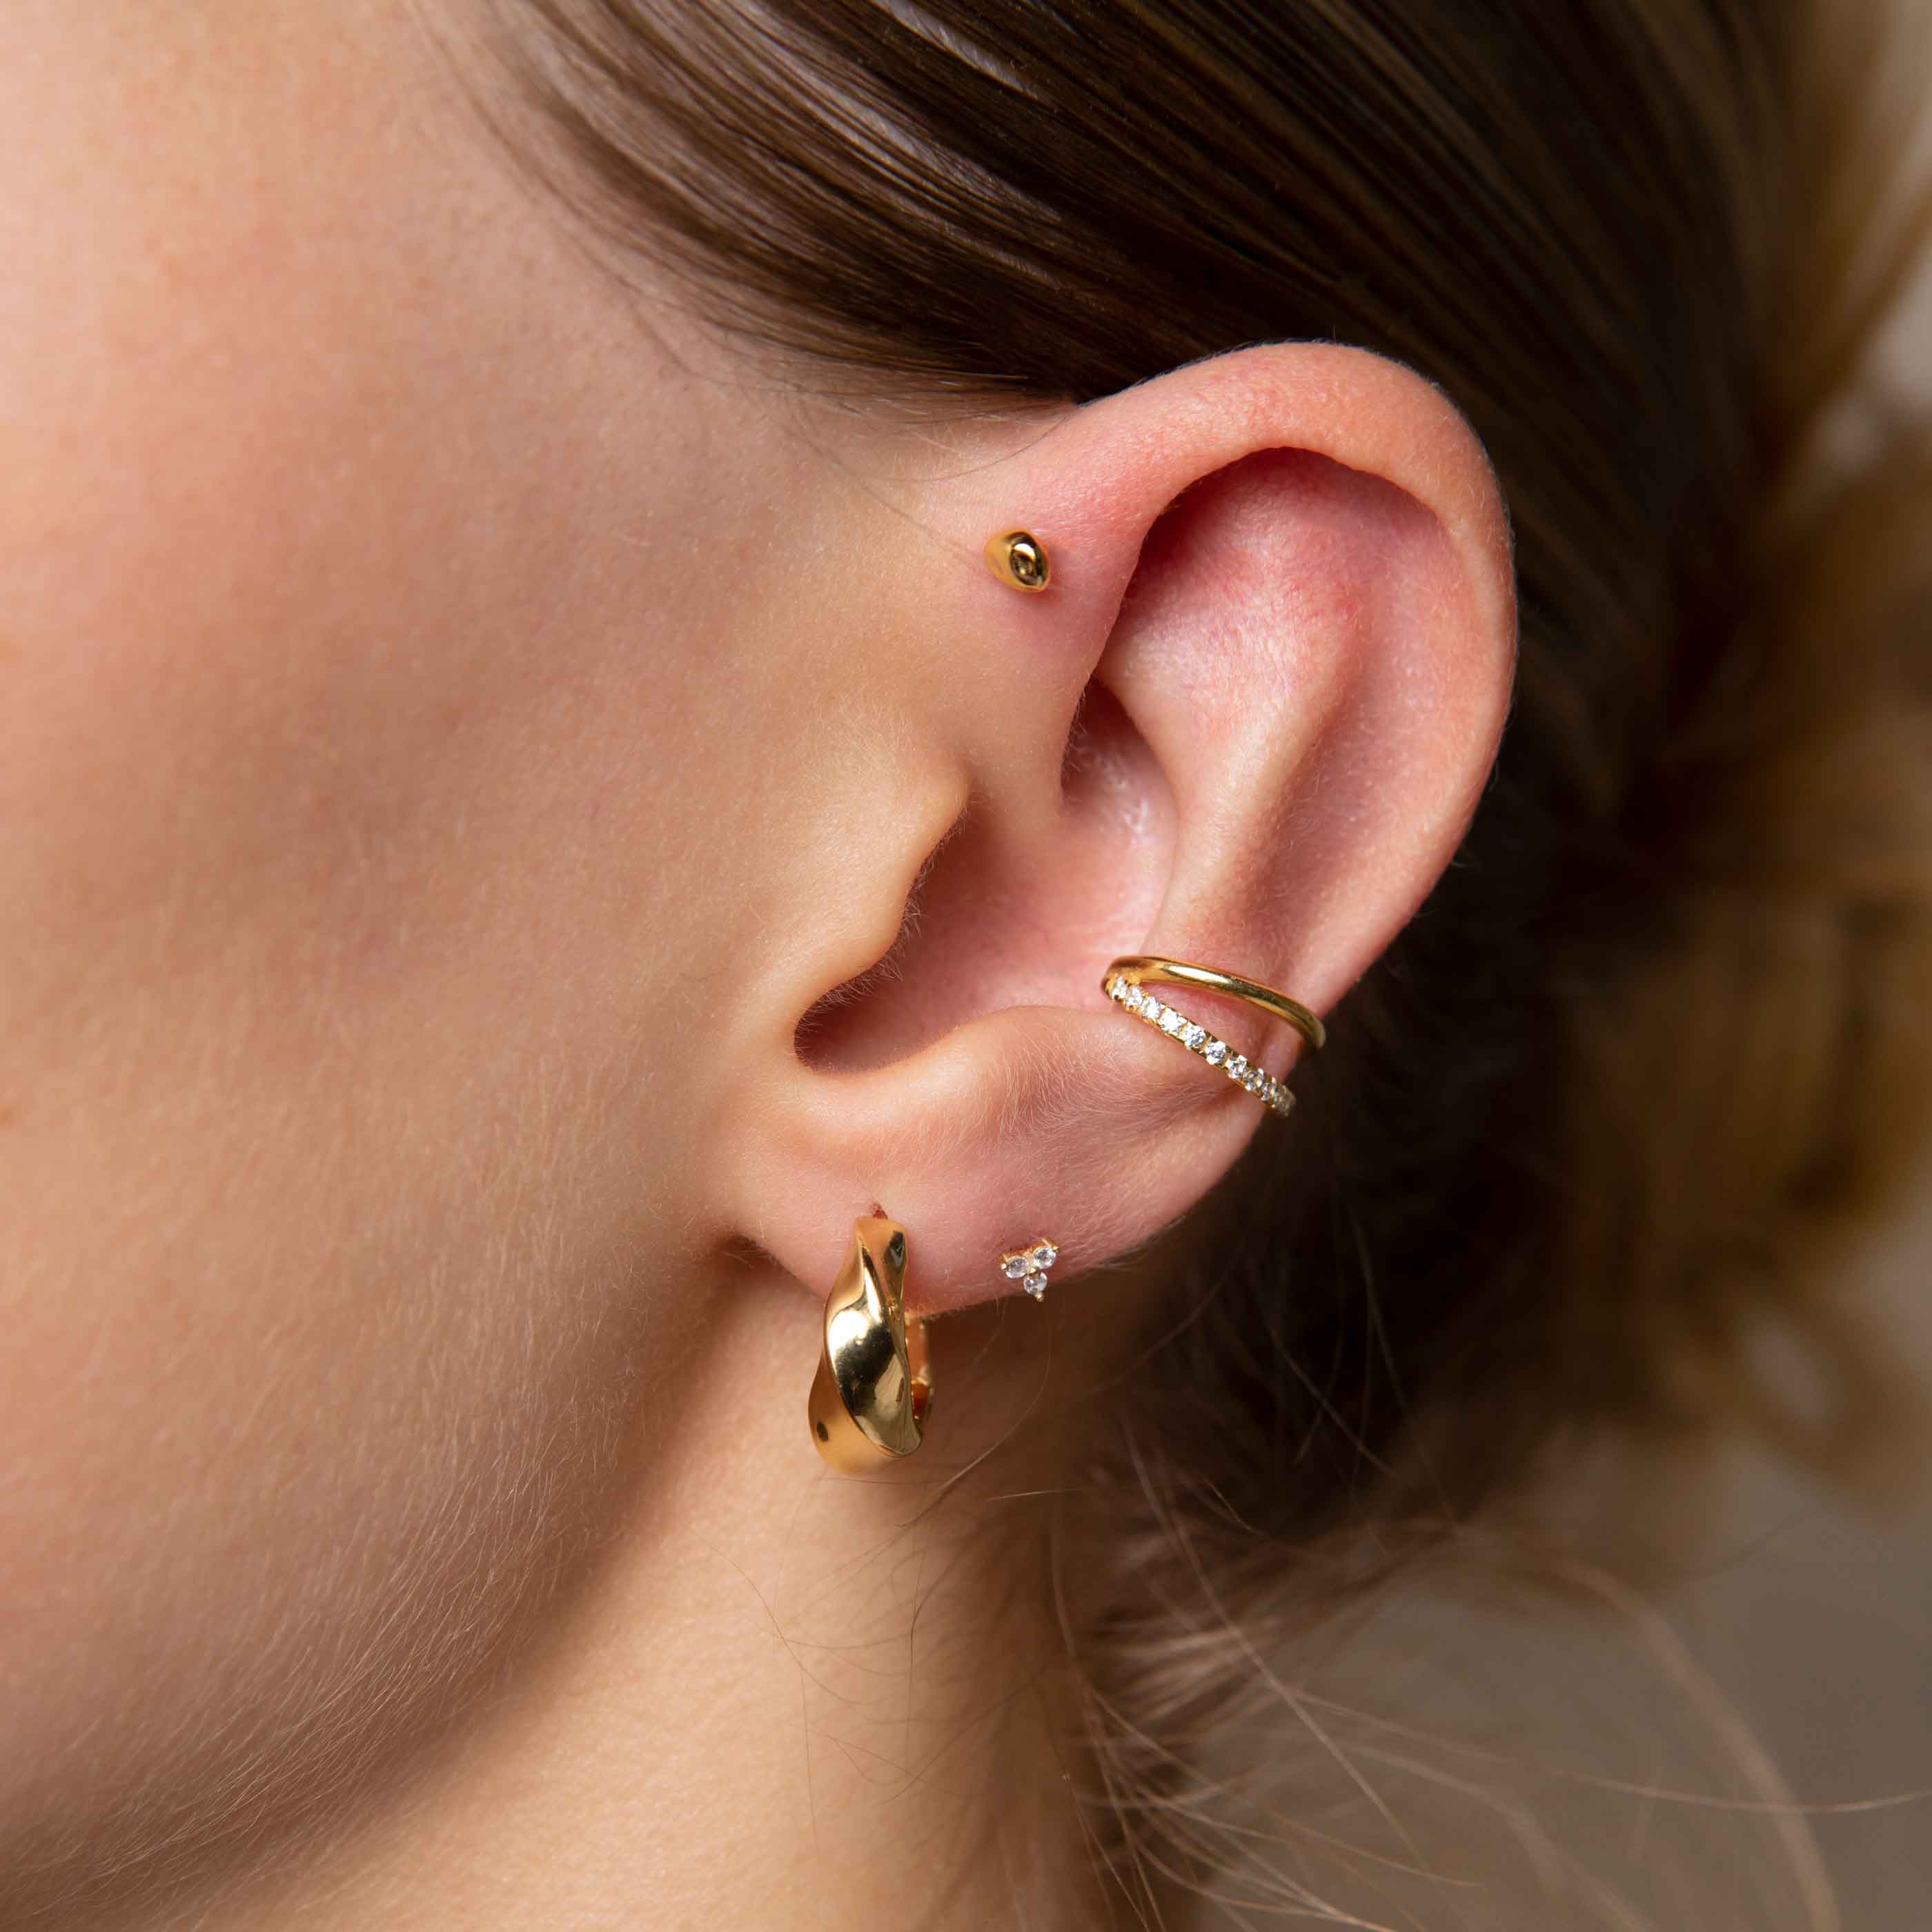 Illusion Crystal Ear Cuff in Gold worn with elemental hoops and triple crystal stud earrings